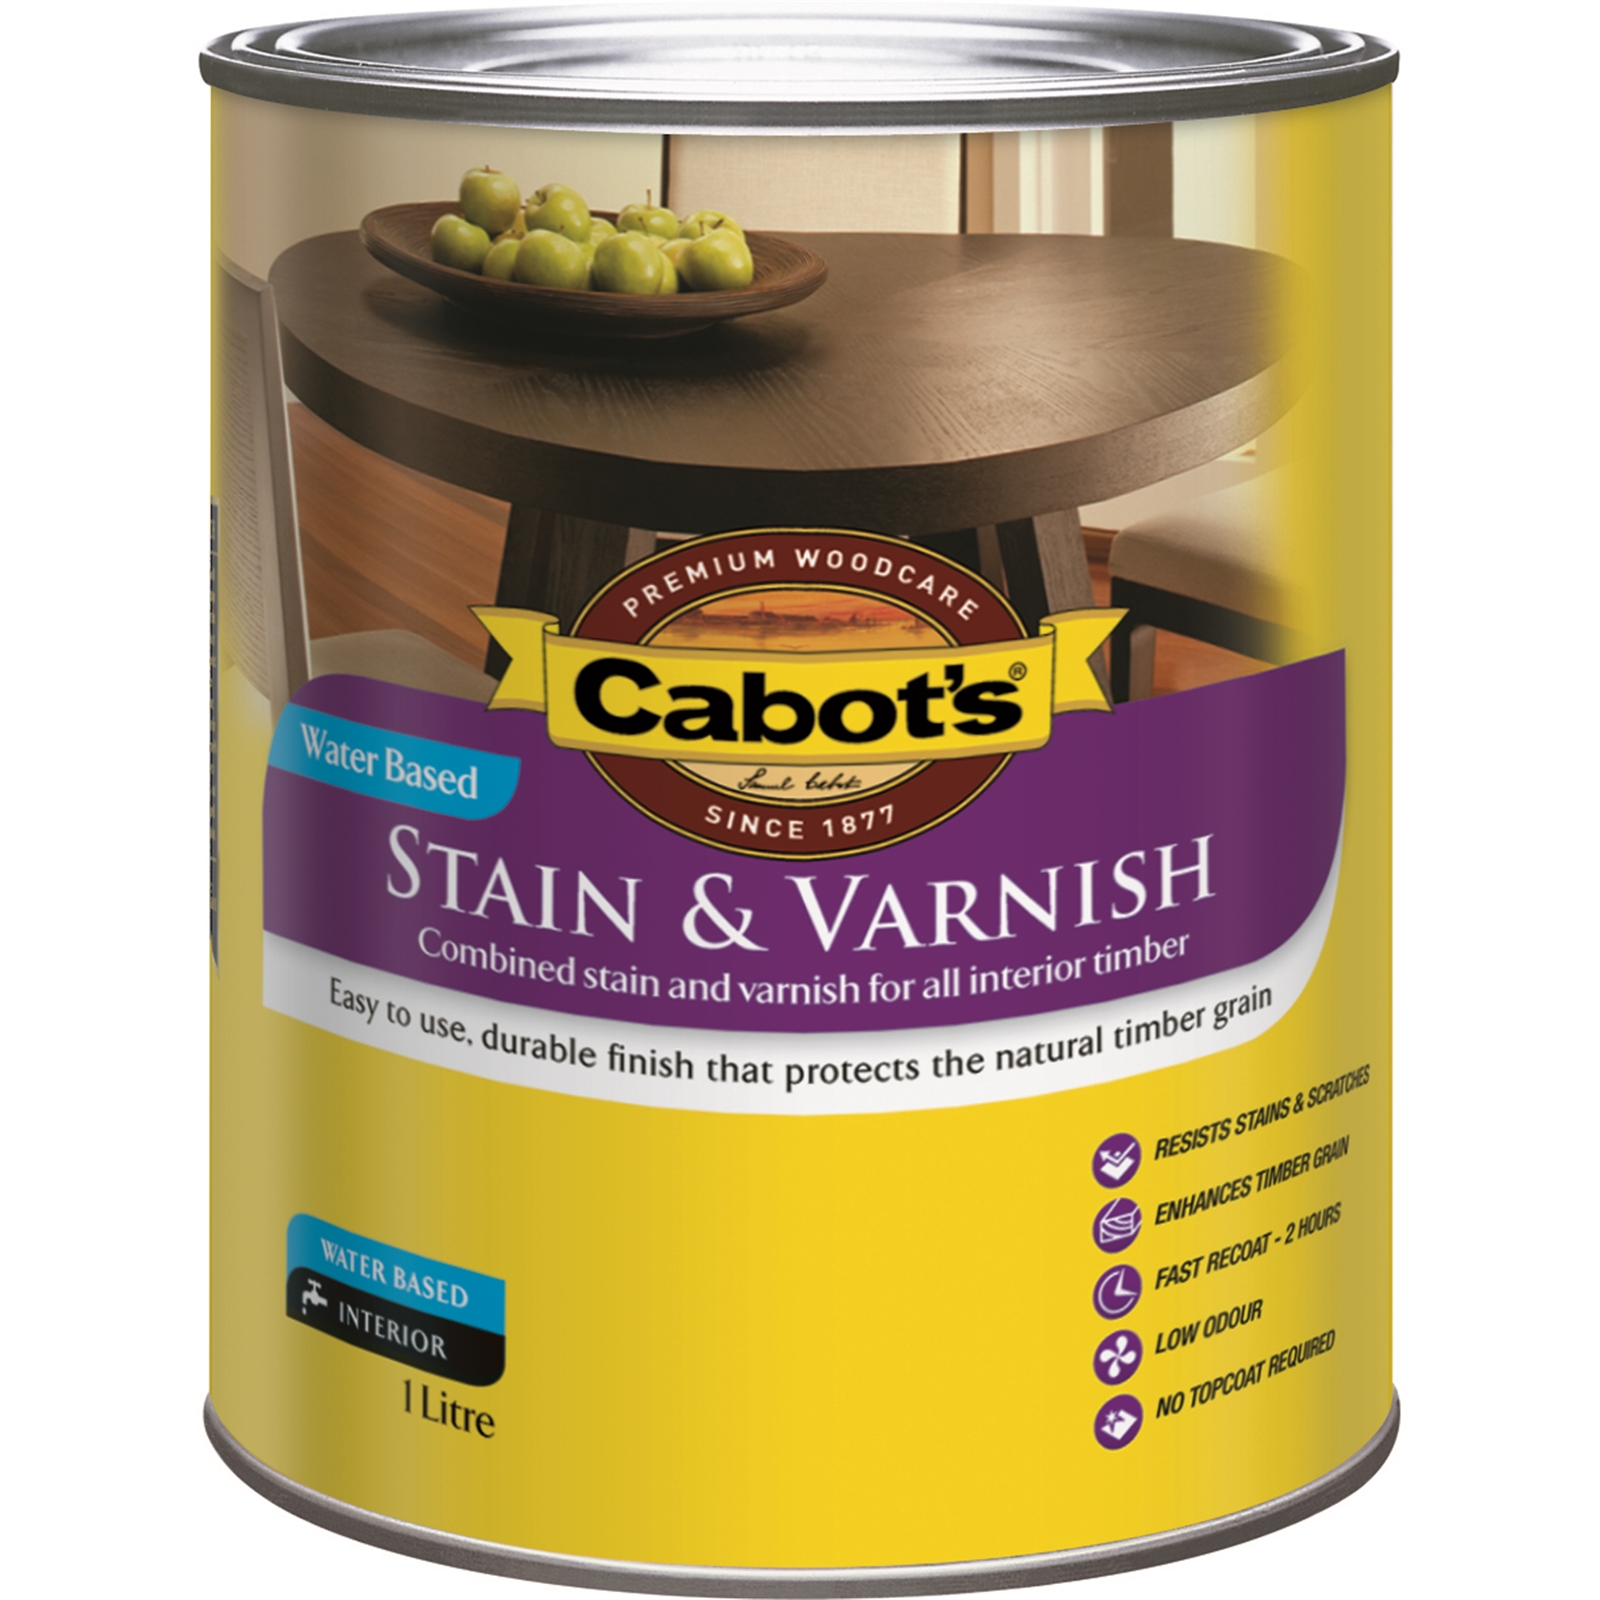 Cabot's 1L Gloss Maple Water Based Stain and Varnish